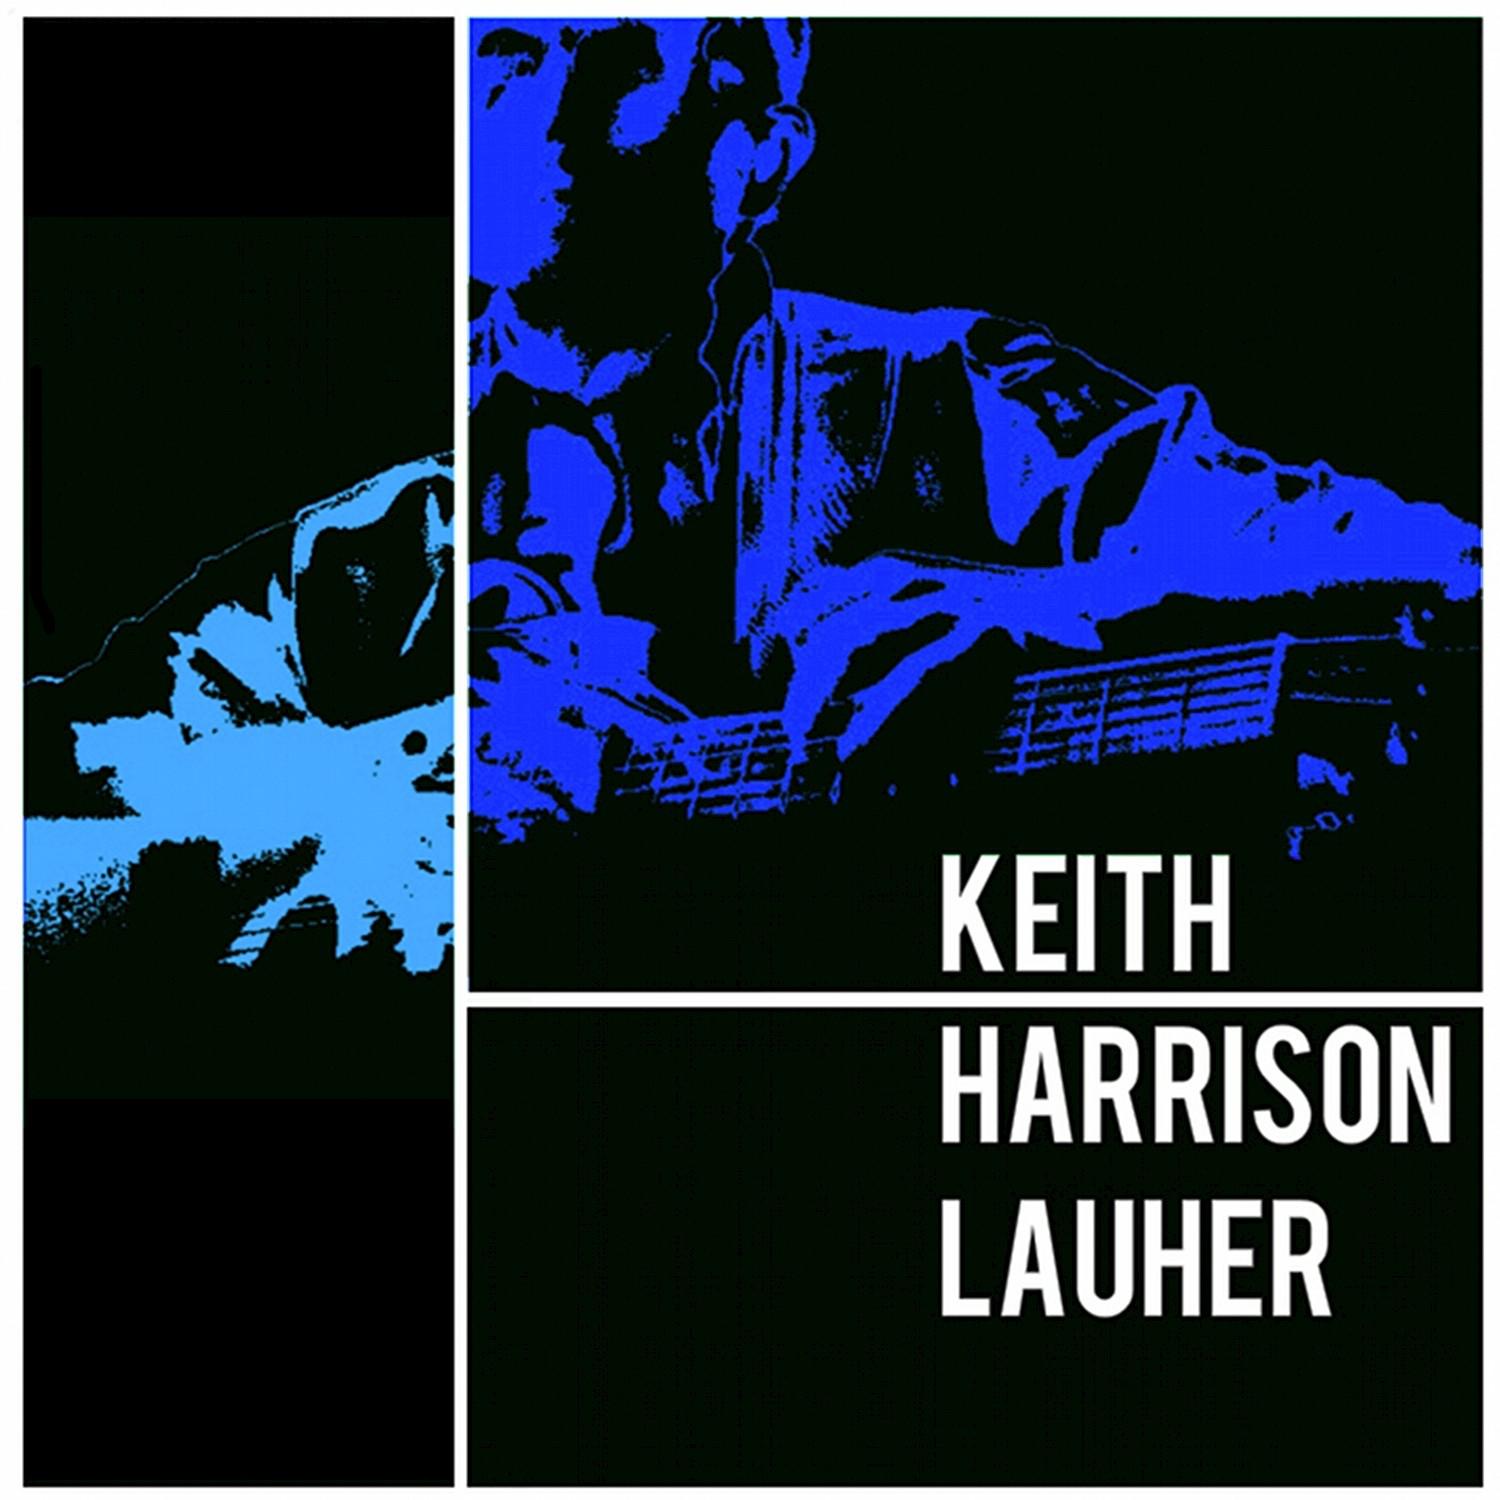 Keith Harrison Lauher - EP